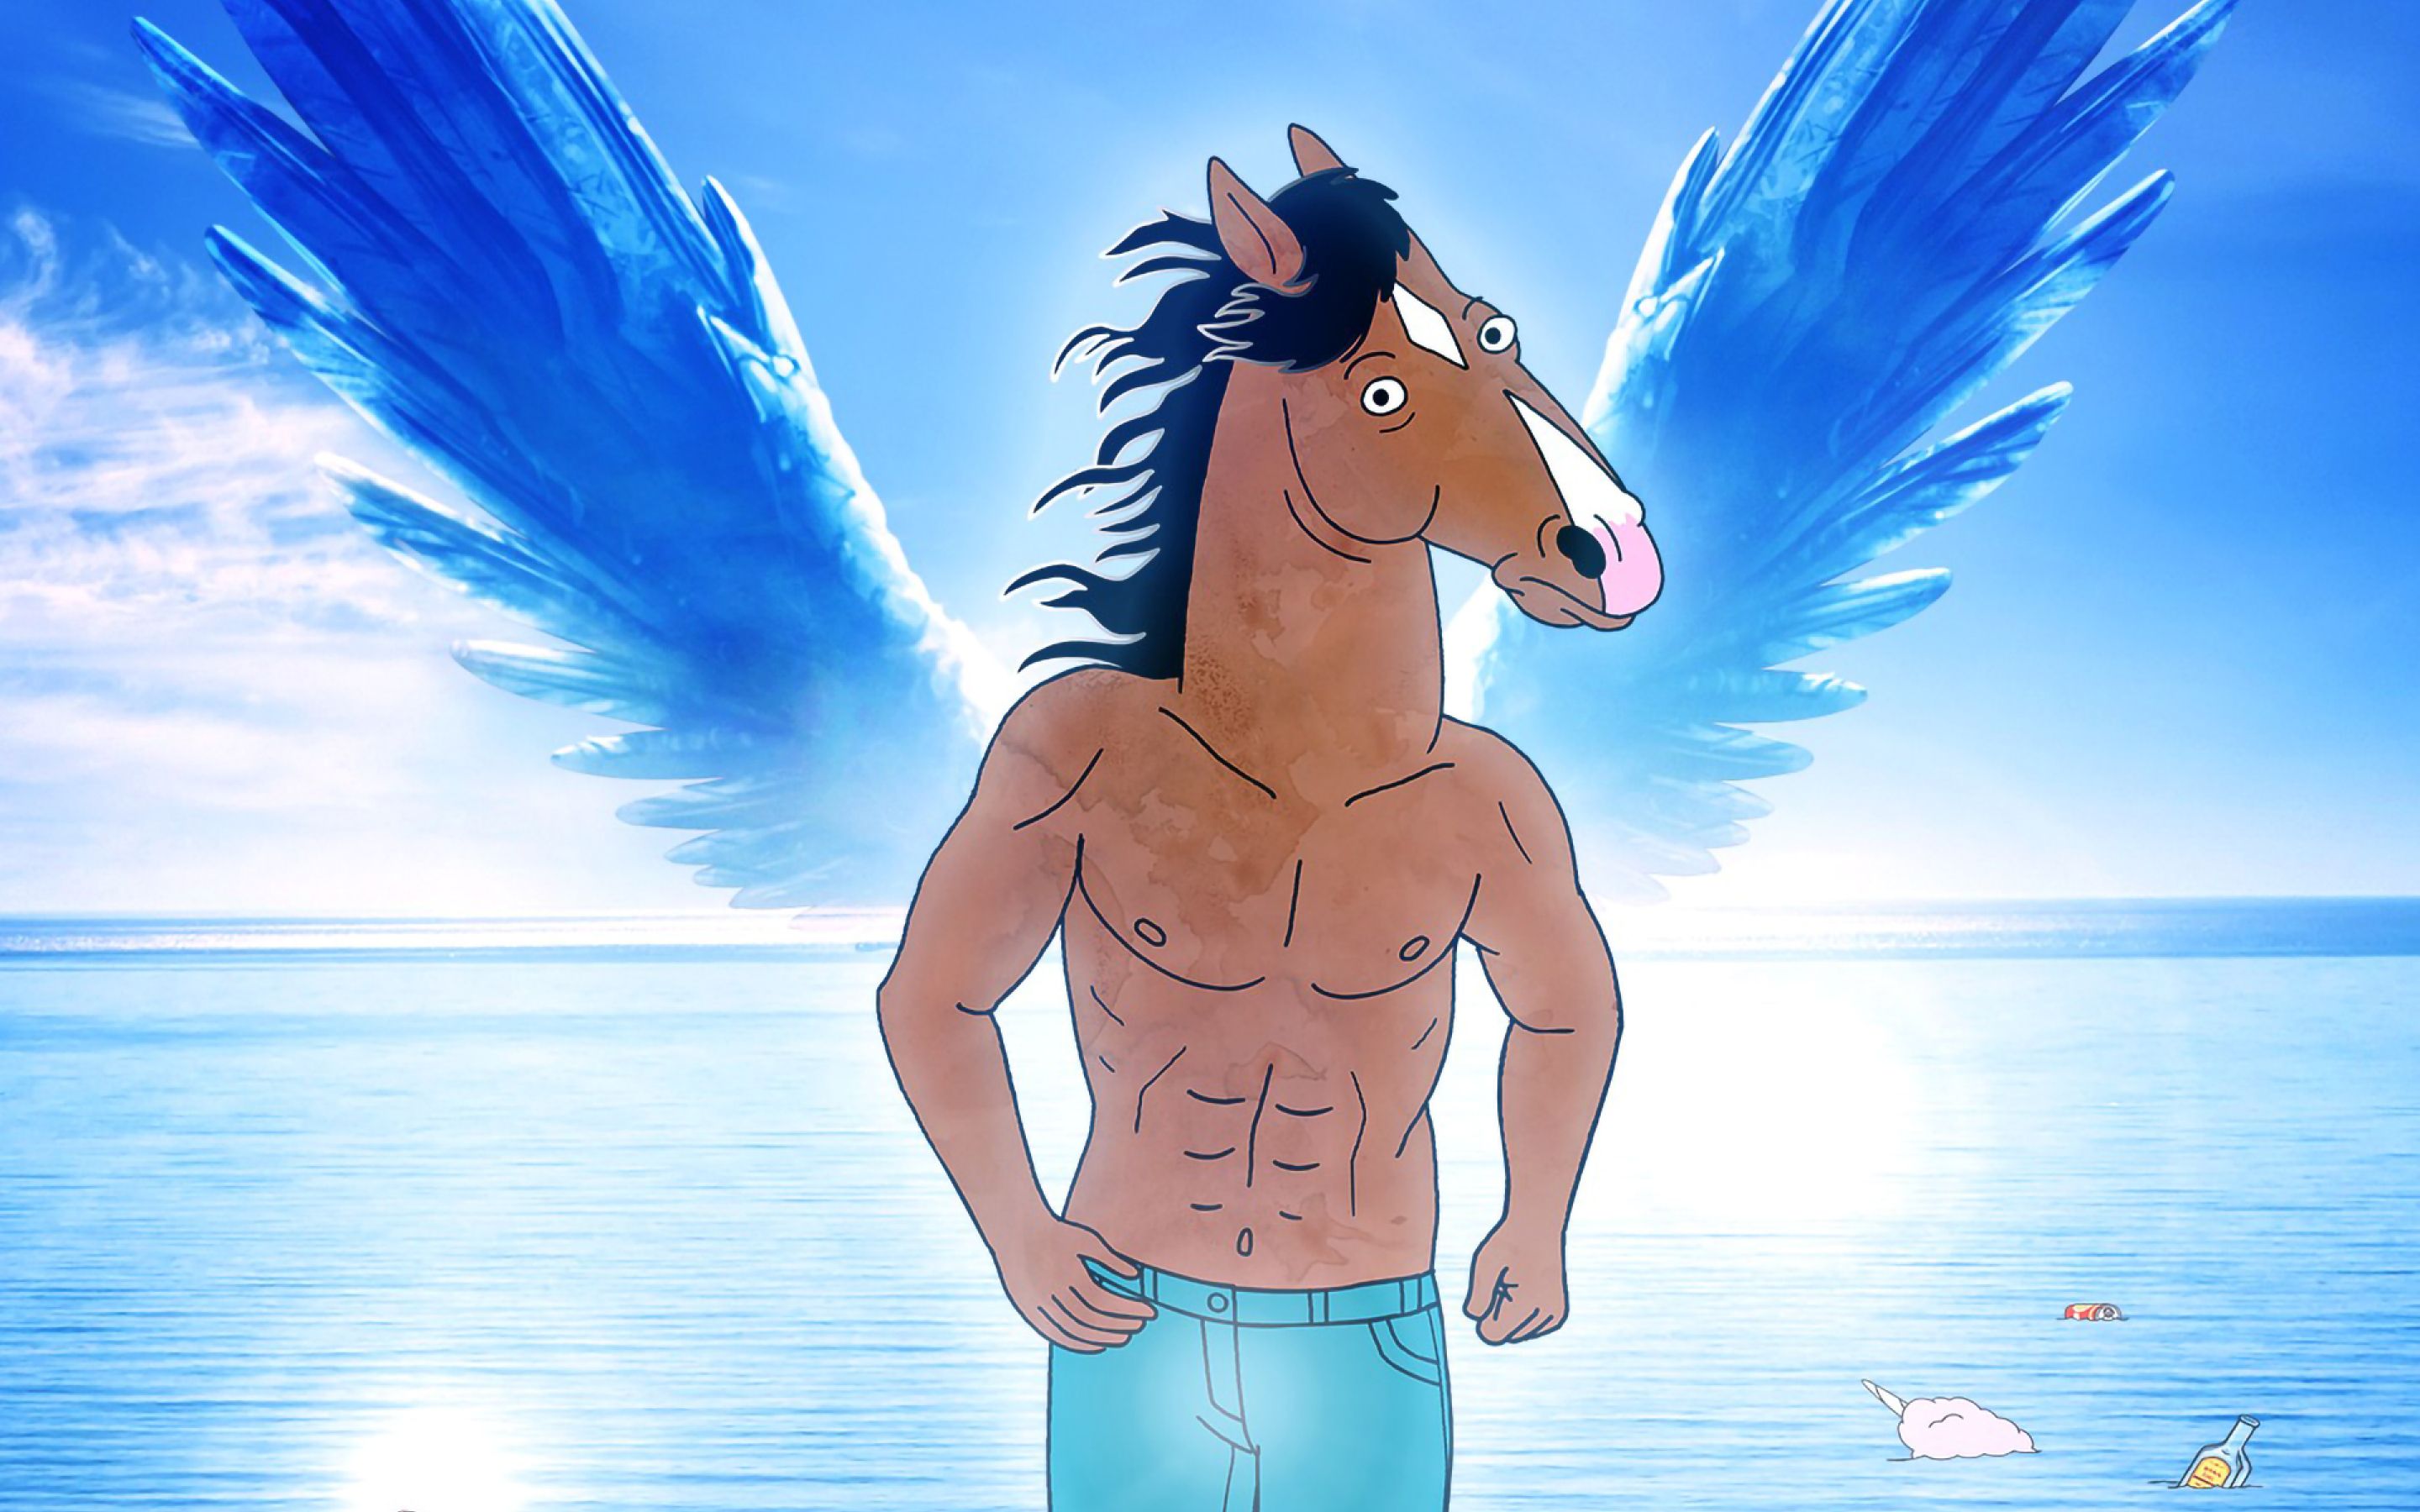 Great Bojack Horseman Desktop Wallpaper of all time Check it out now 